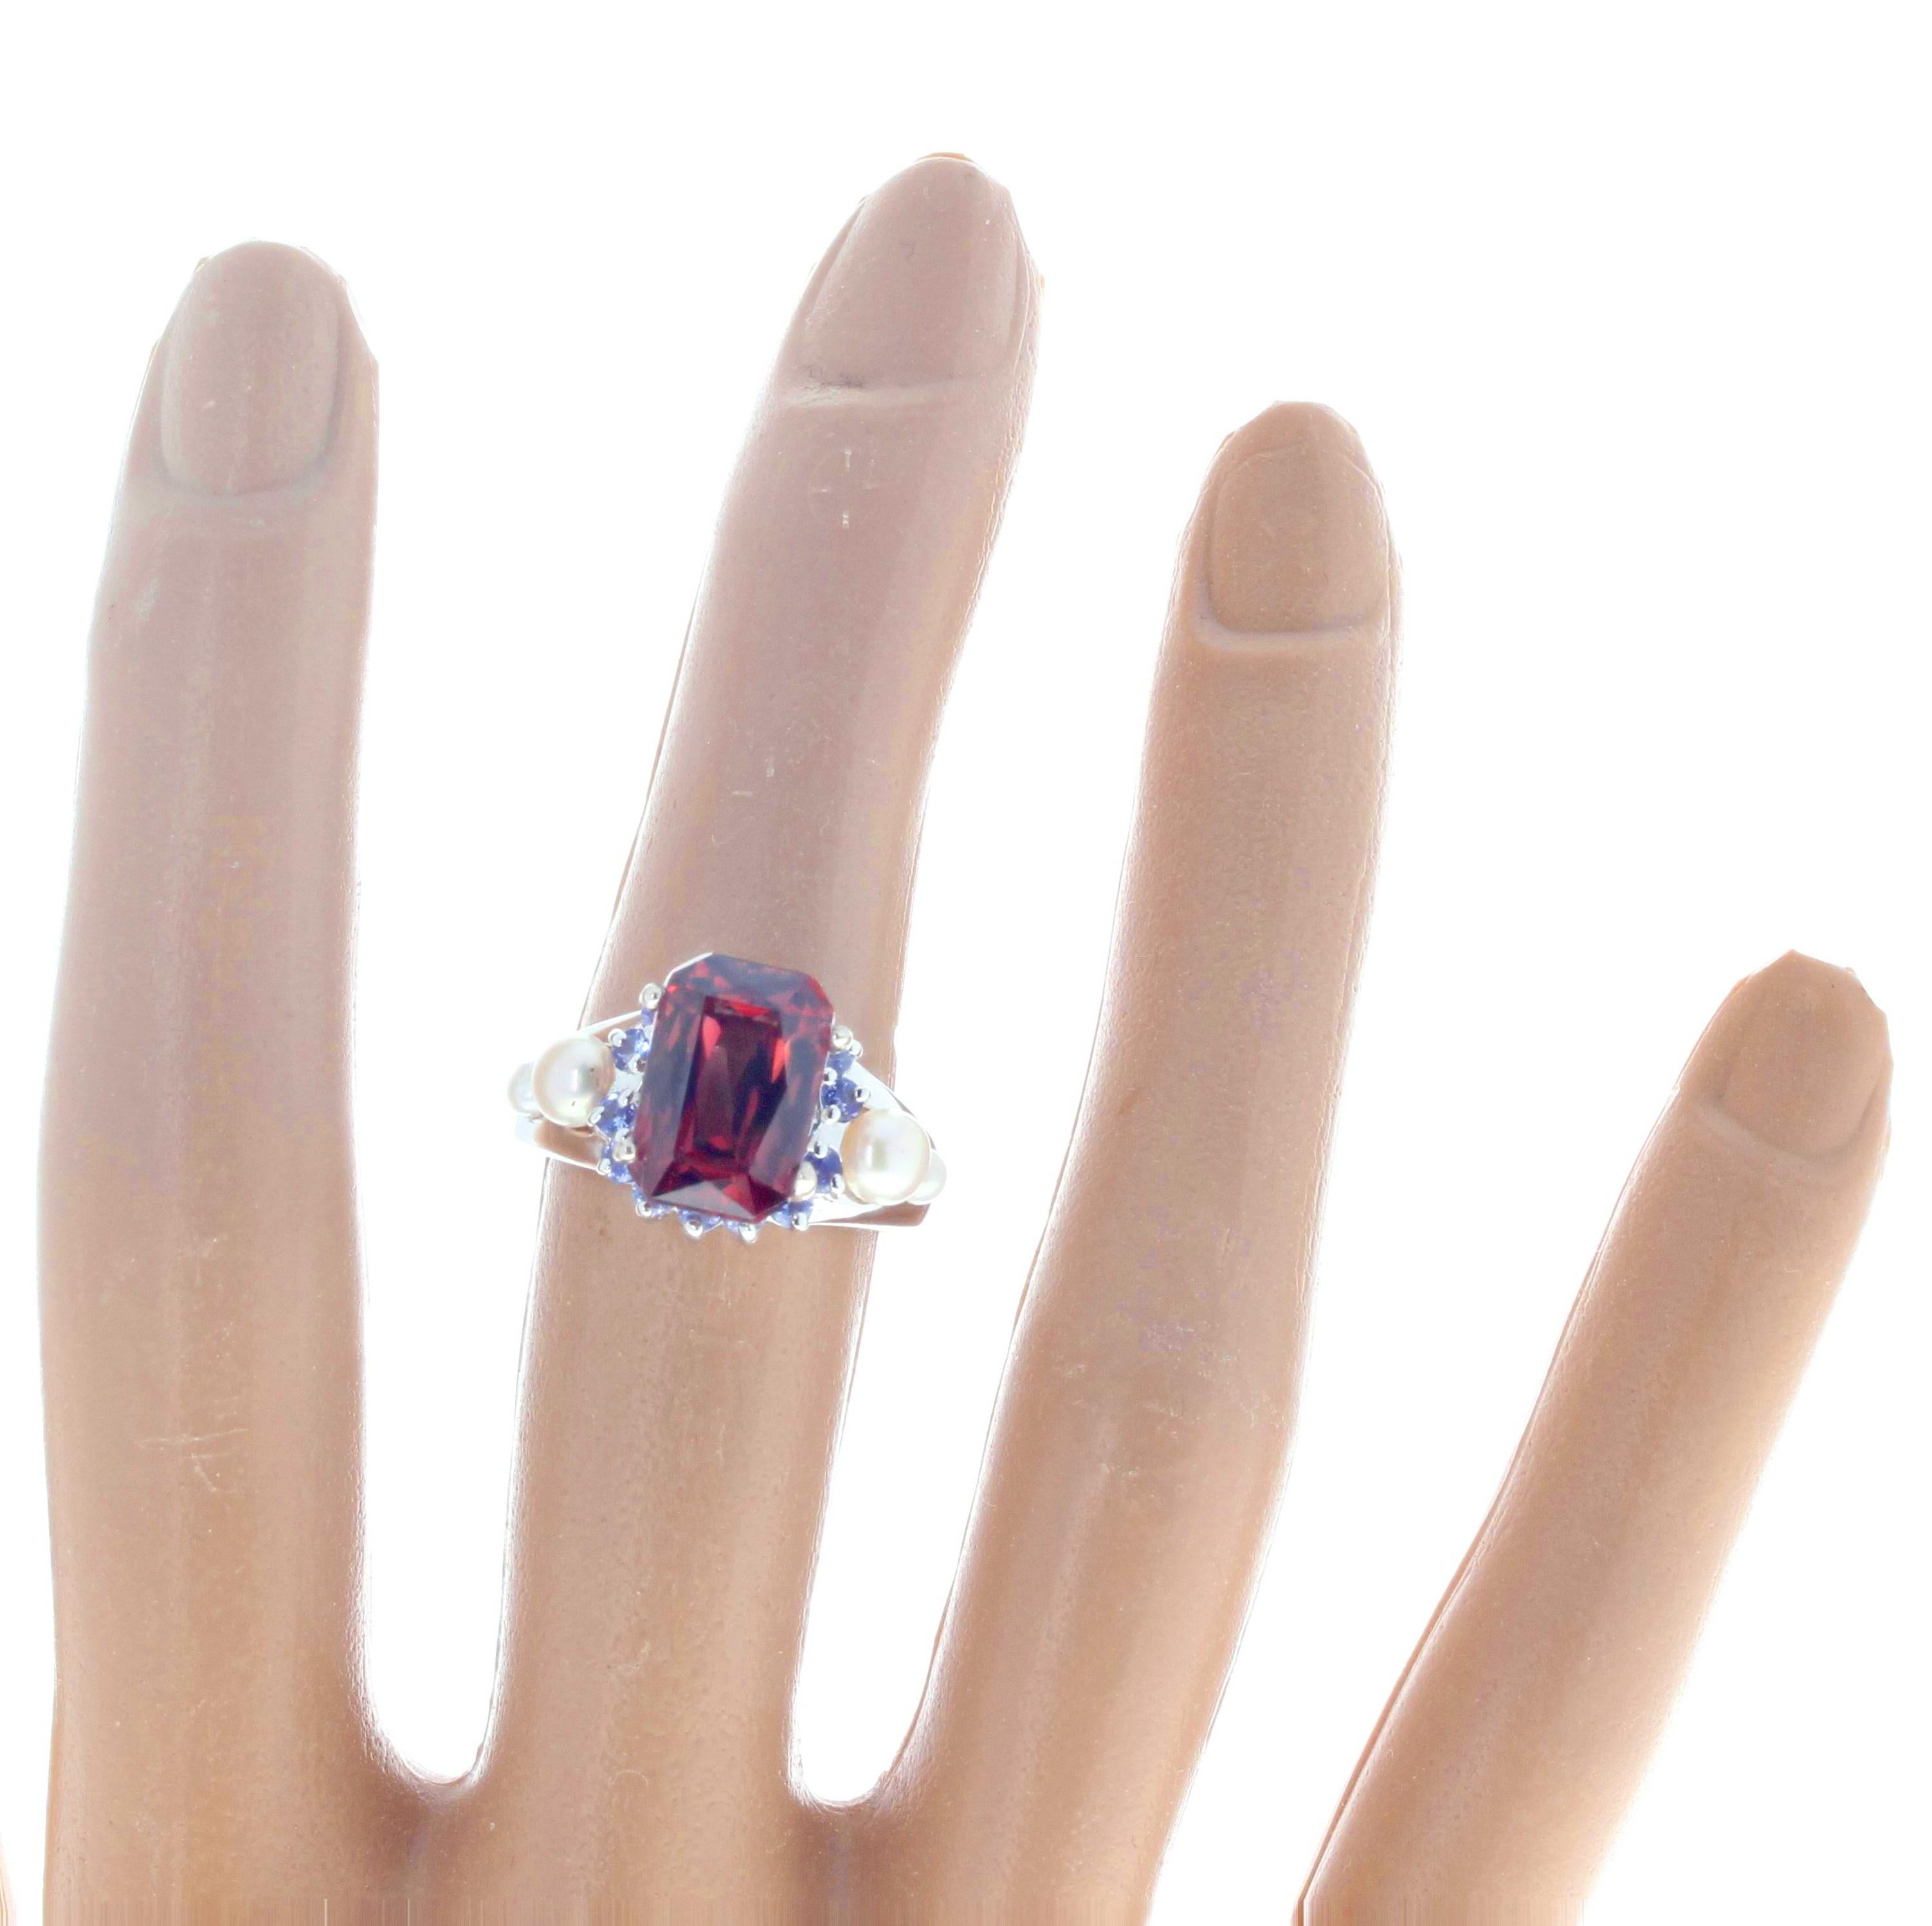 Mixed Cut AJD Elegant 7.2 Ct Brilliant Red Zircon, Sapphire, Pearl Sterling Cocktail Ring